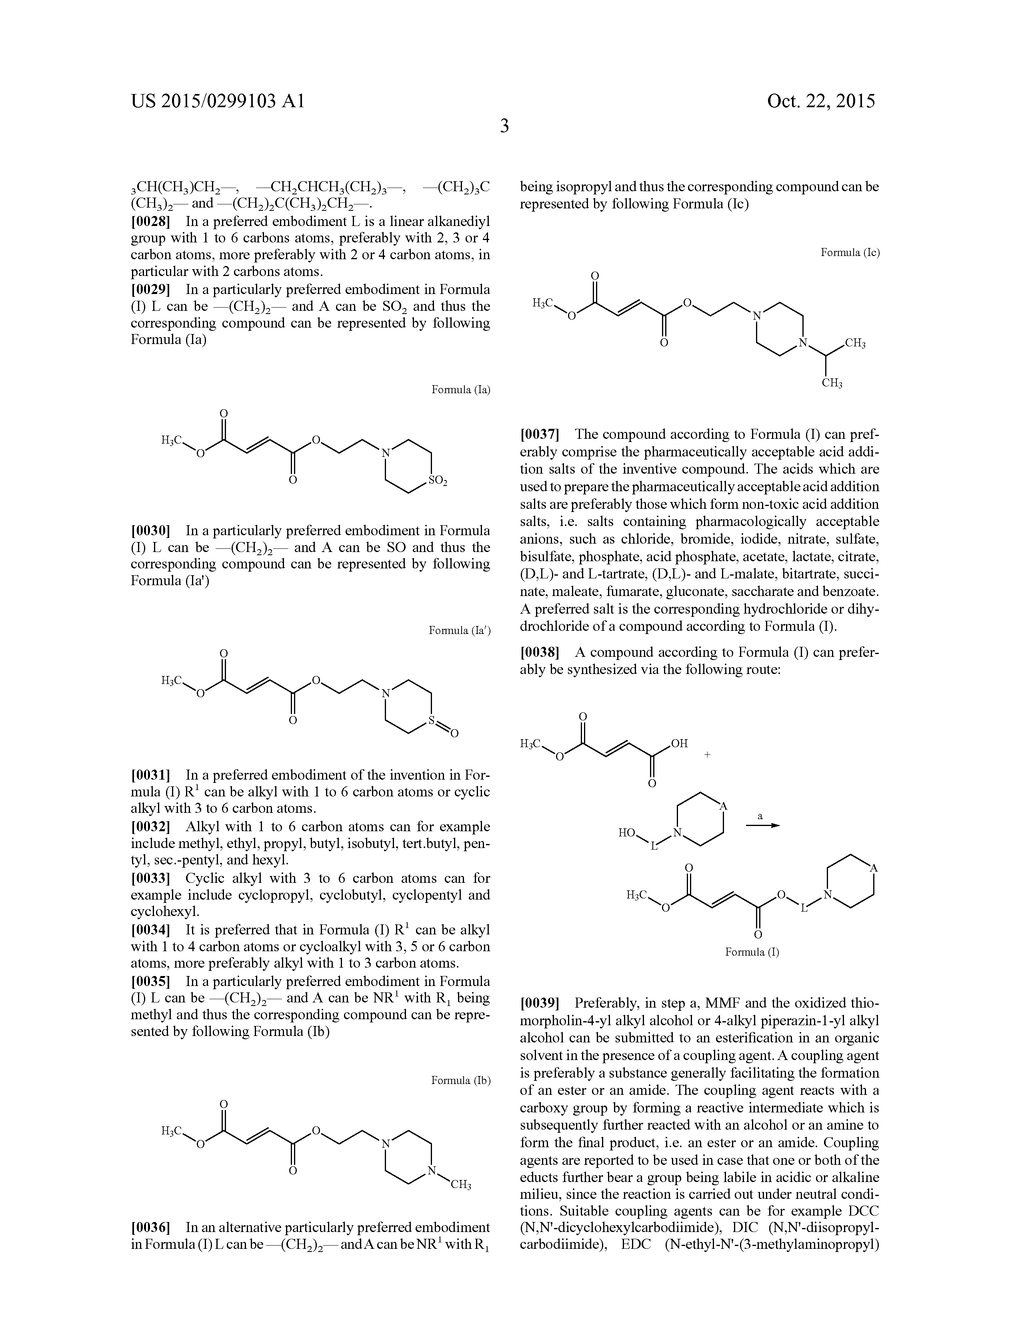 PRODRUGS OF MONOMETHYL FUMARATE (MMF) - diagram, schematic, and image 10